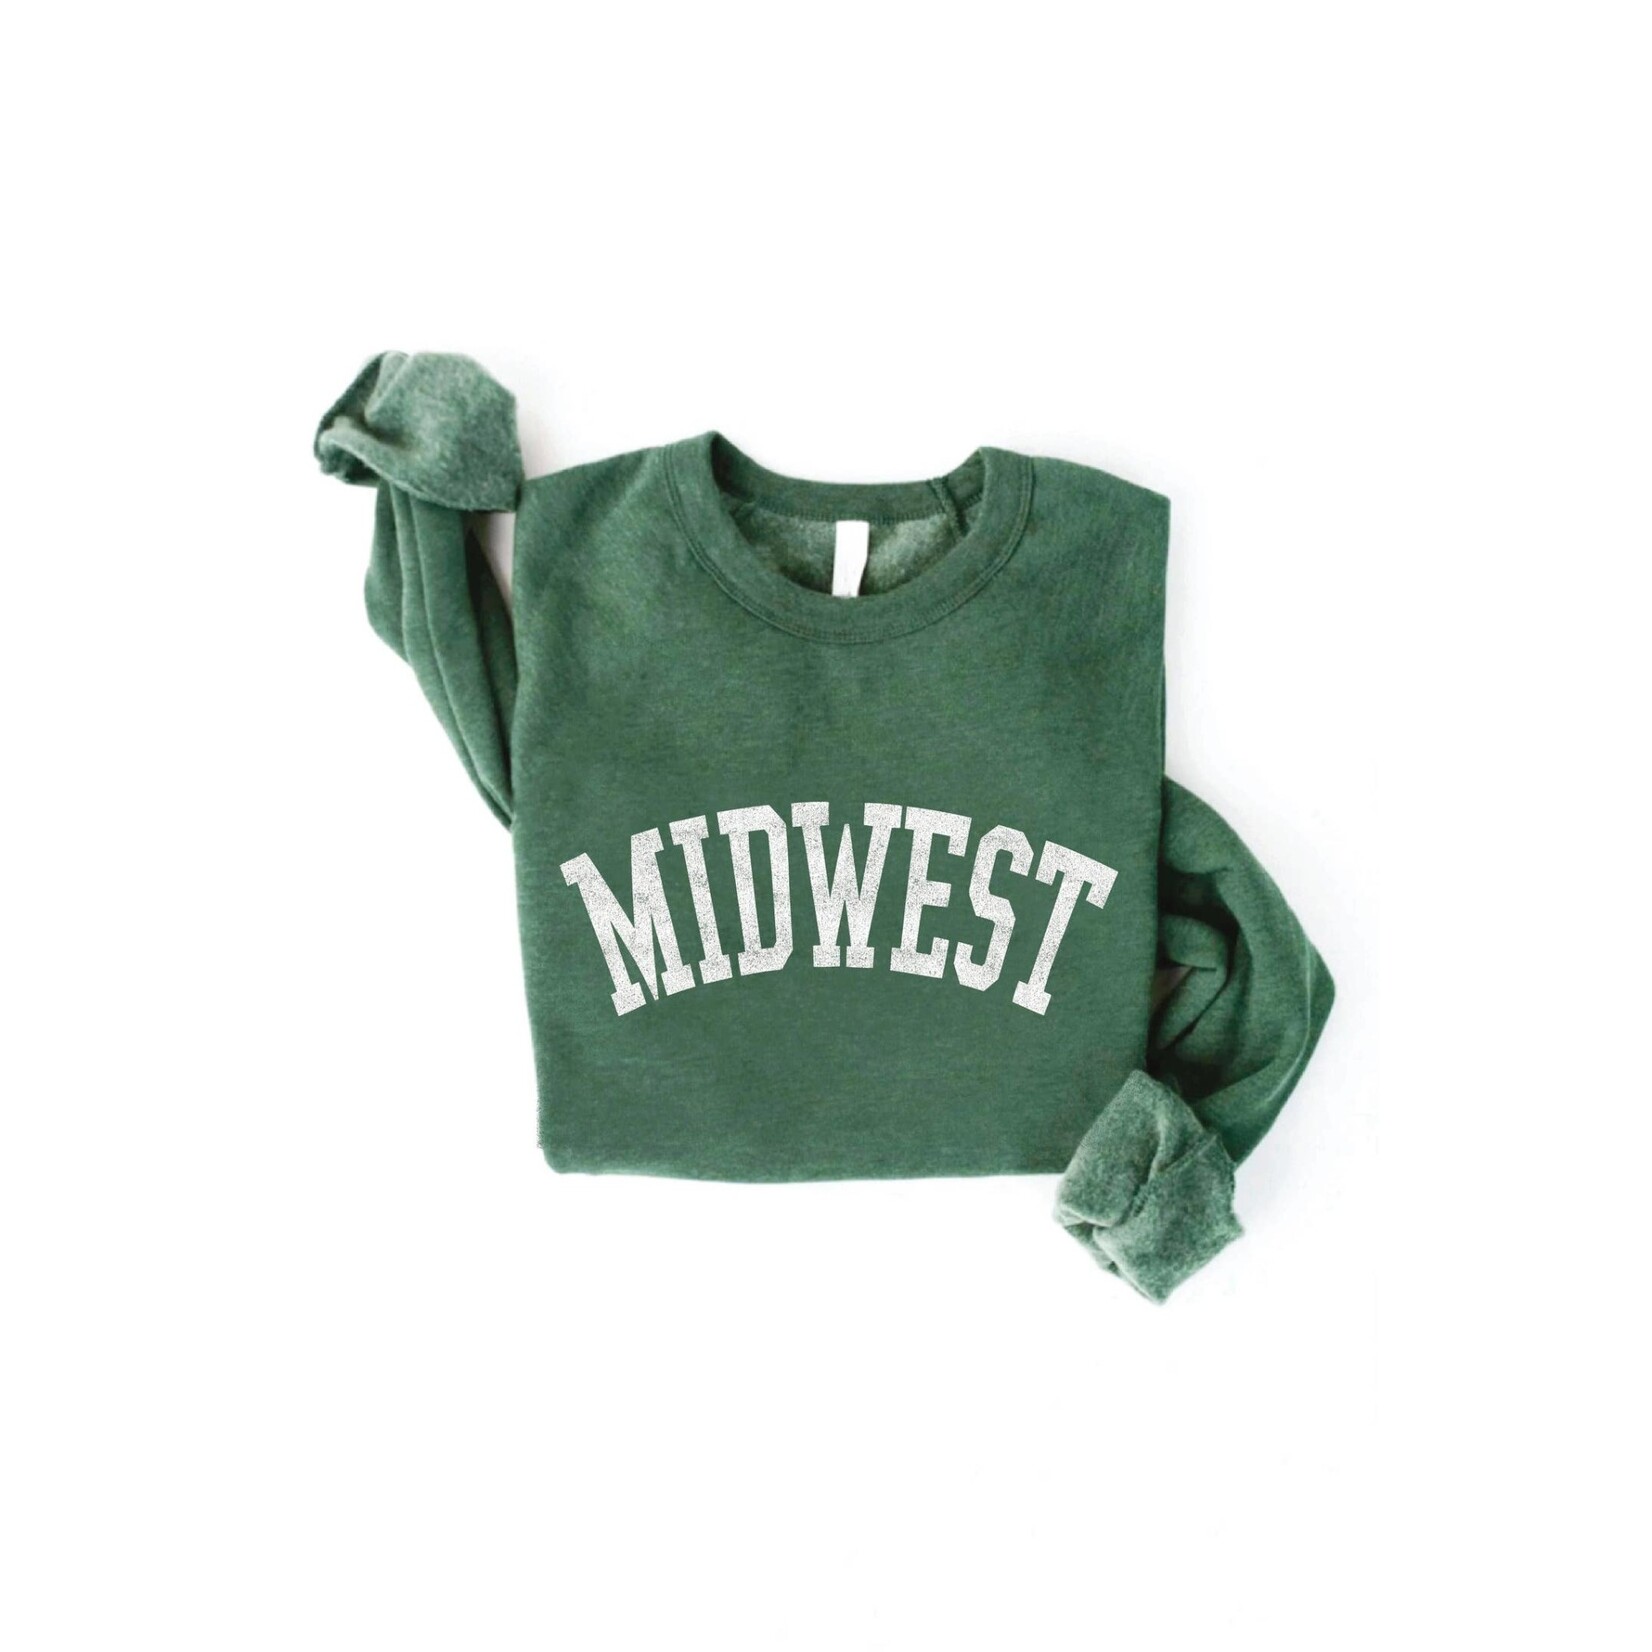 Oat Collective Adult Sweatshirt - Midwest, Heather Forest